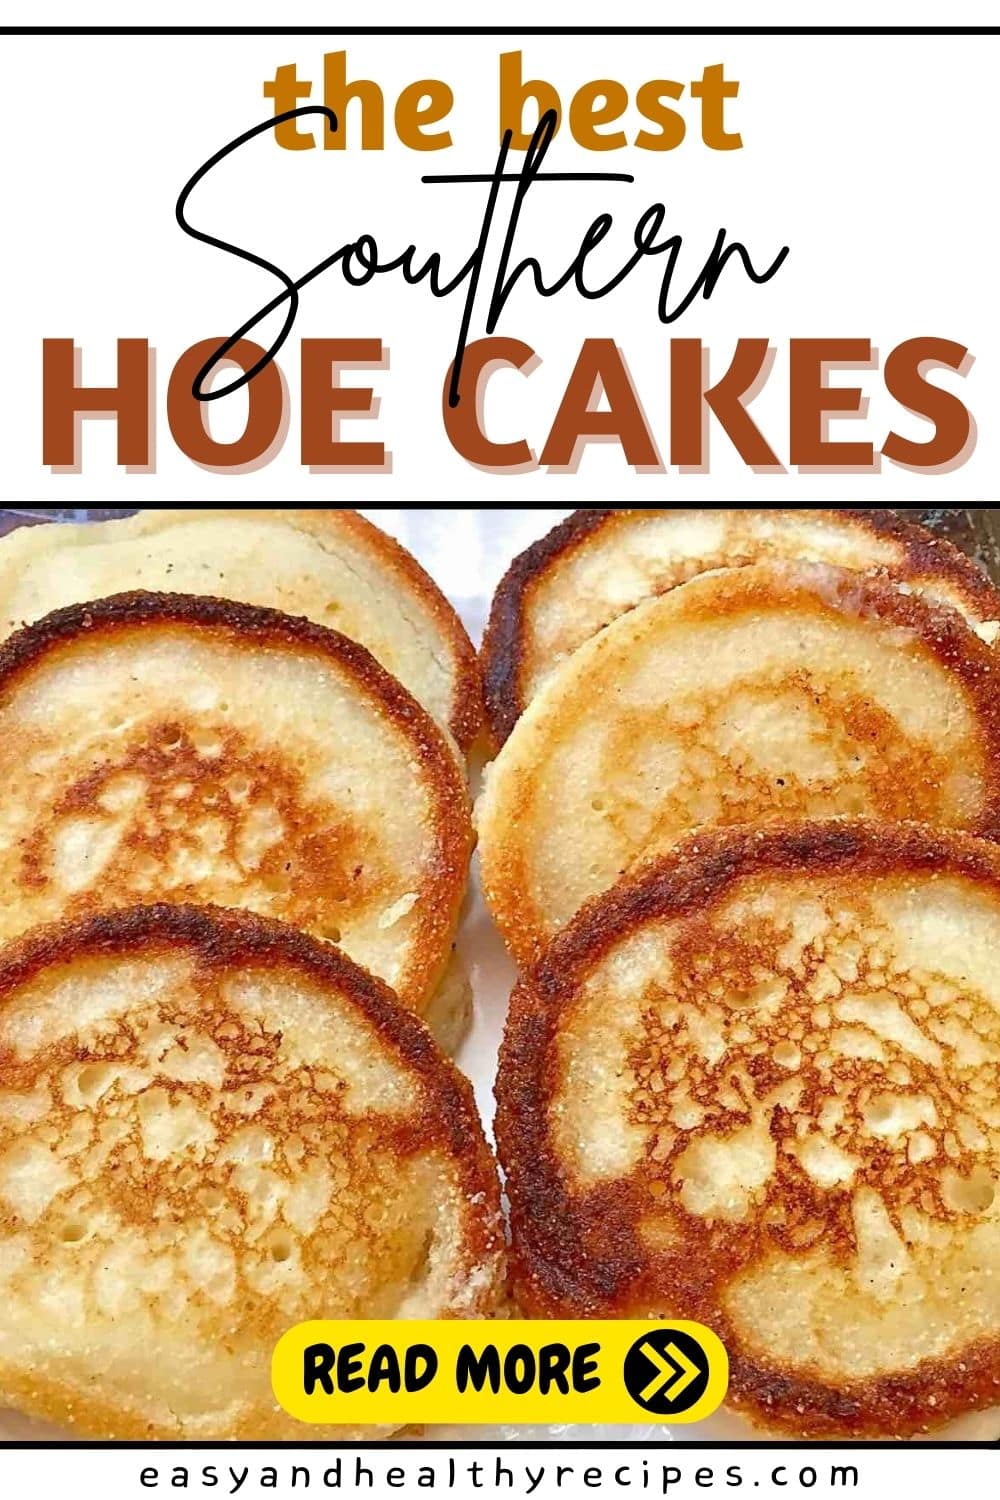 Southern Hoe Cakes